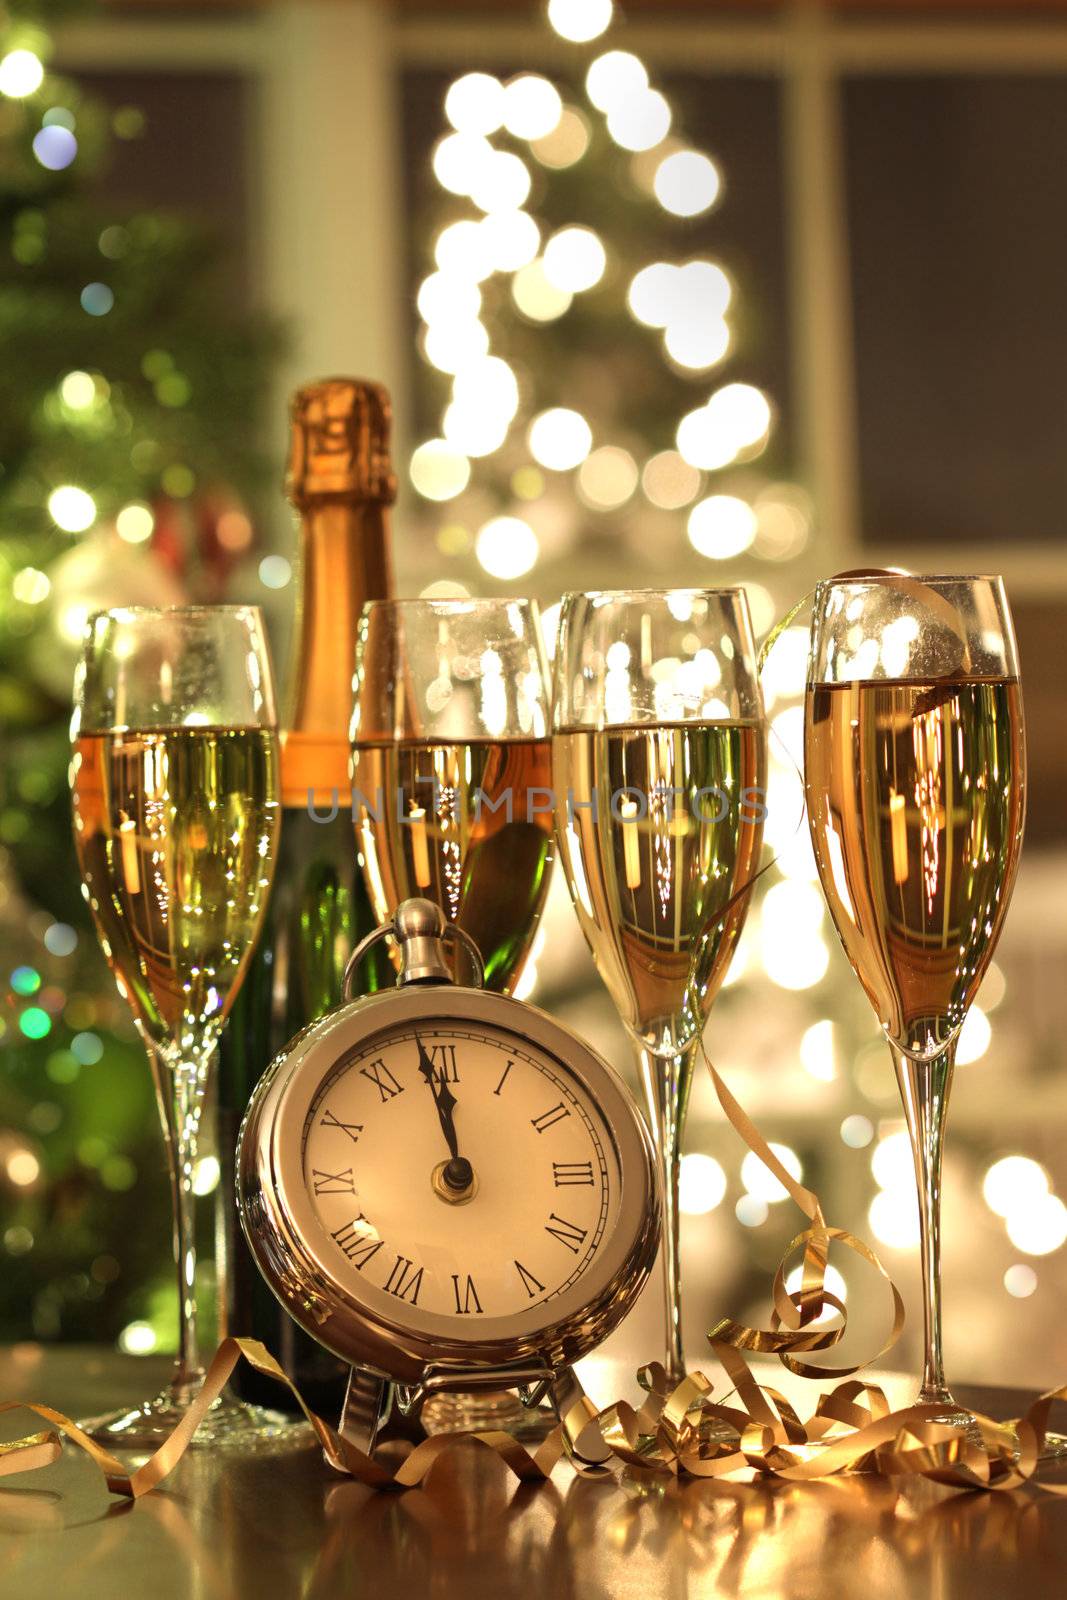 Four glasses of champagne ready for the New Year by Sandralise